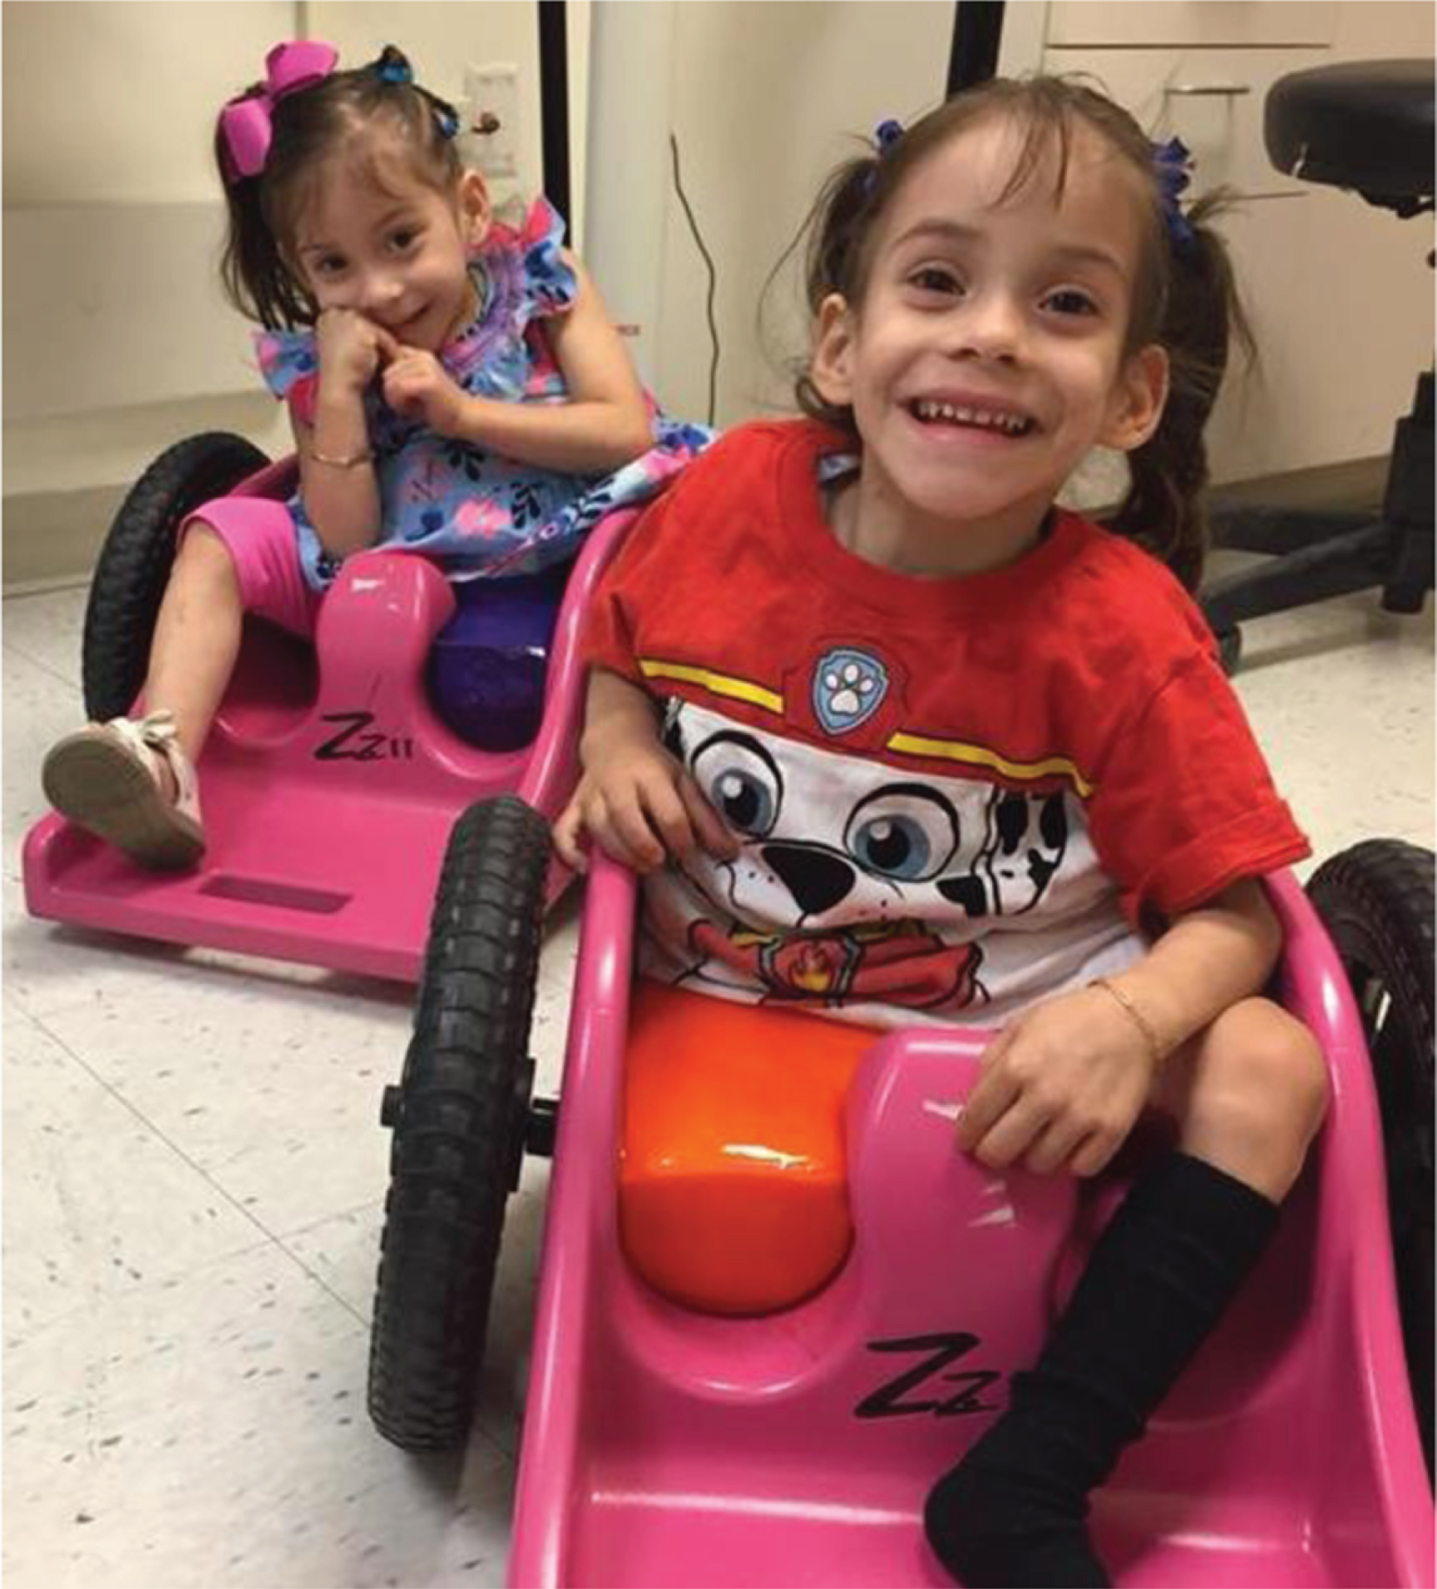 The twins received ZipZac chairs that were customized by Shriners with flexible, custom-formed foam to support each twin’s hemipelvis at midline as well as with parent push handles for use in the community. (Written photo consents obtained.).